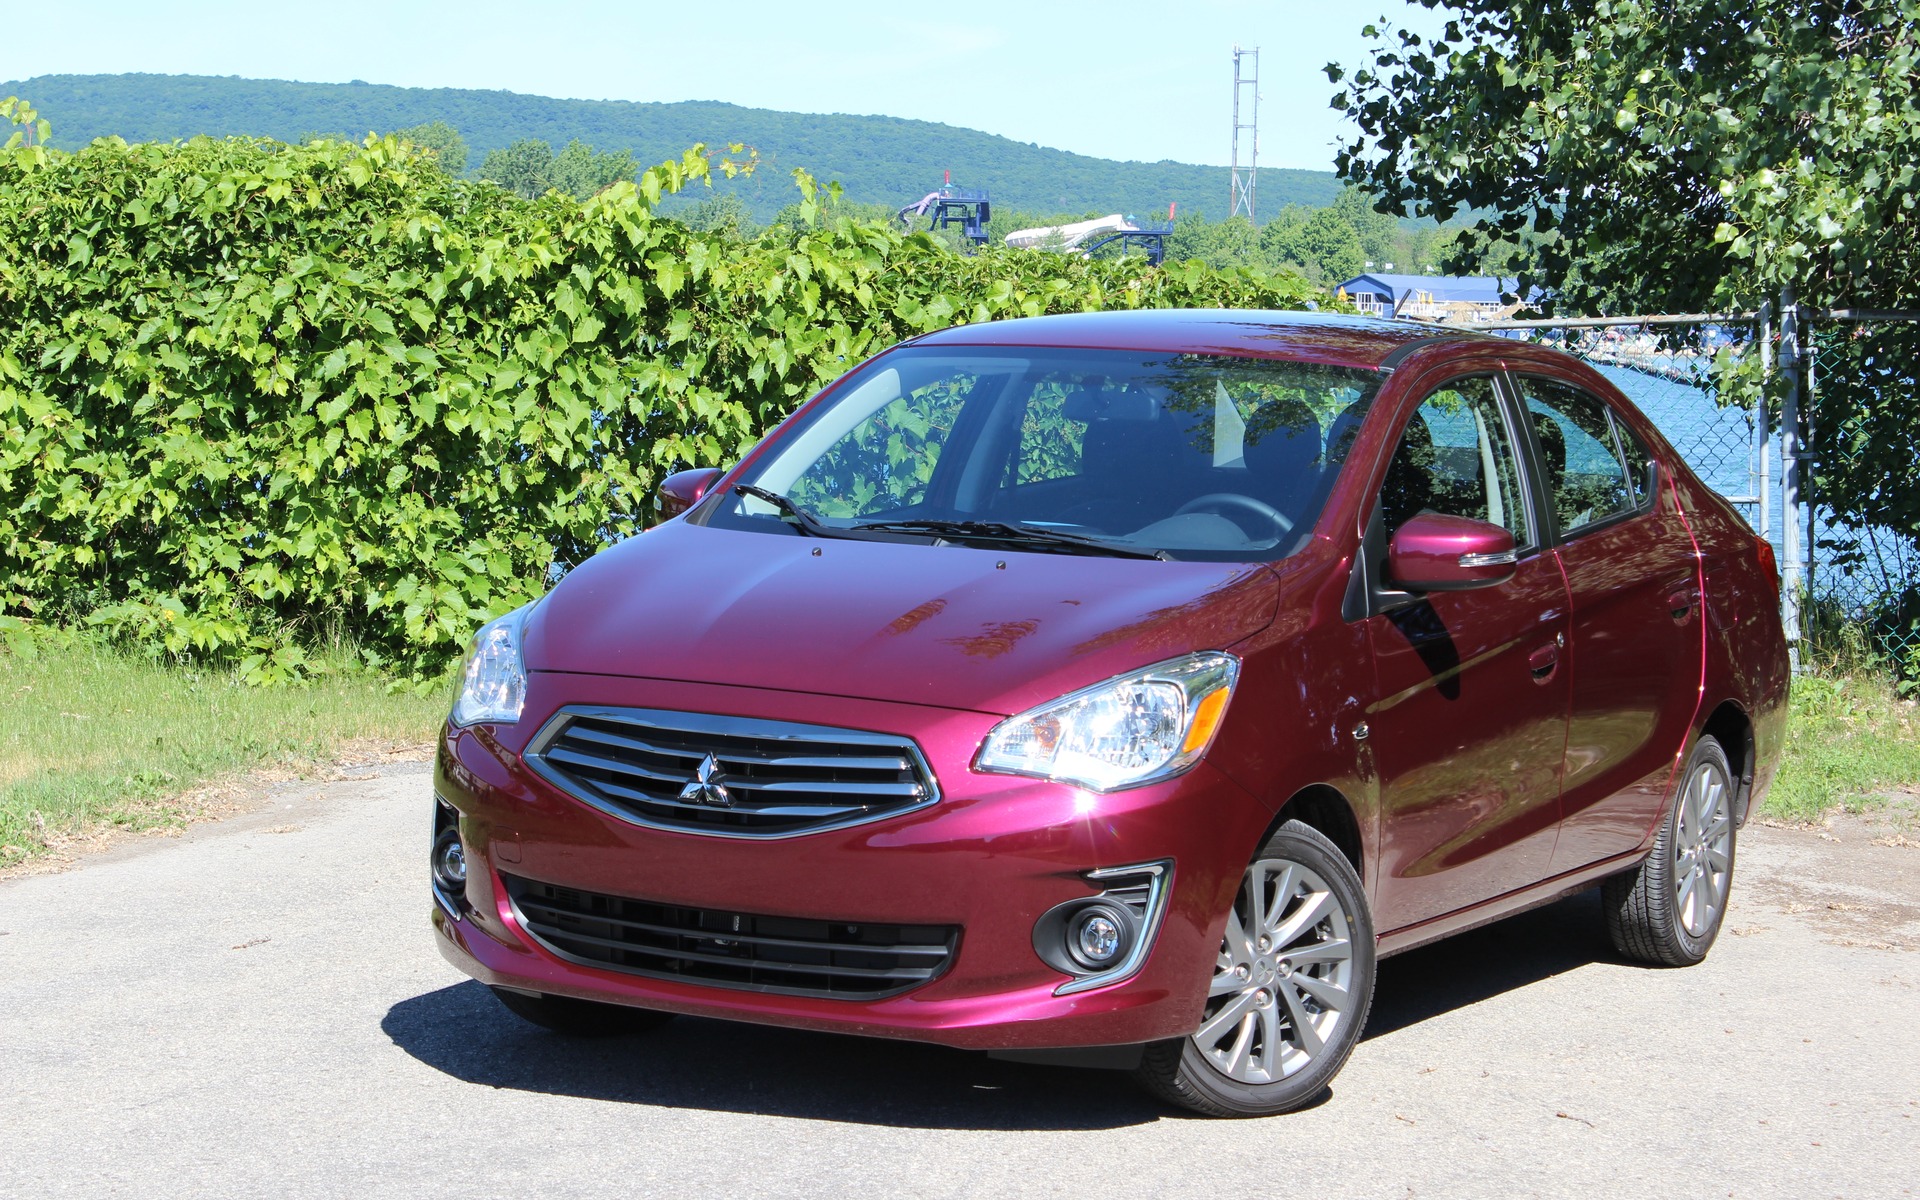 2017 Mitsubishi Mirage G4: Slowly, But Surely - The Car Guide